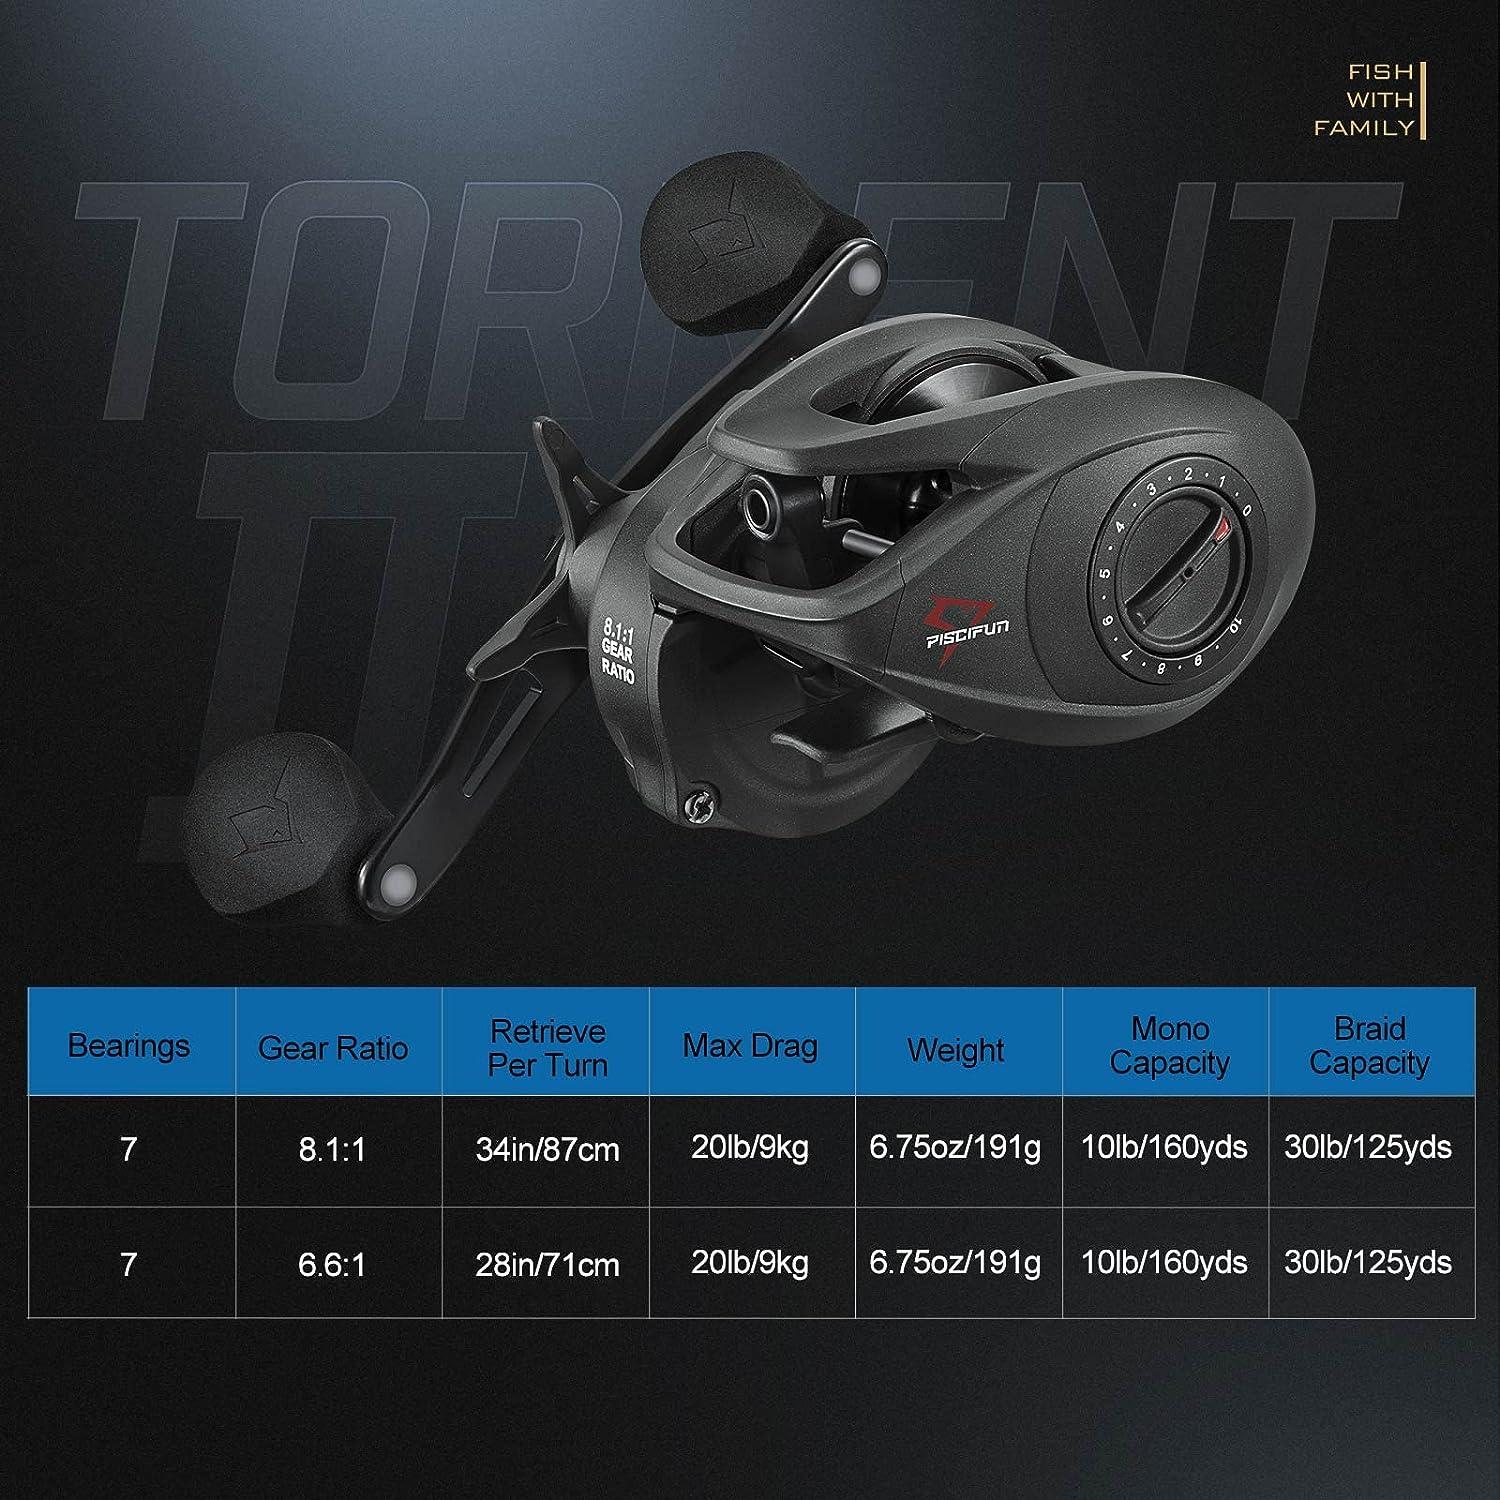 Piscifun Torrent II Baitcasting Fishing Reel, 24LB Max Drag & Magnet  Braking System Baitcasters, Available in 6.6:1/8.1:1 Gear Ratio Low Profile Casting  Reel, Size 100/200 Right Hand Retrieve 100 Size - 8.1:1 Gear Ratio